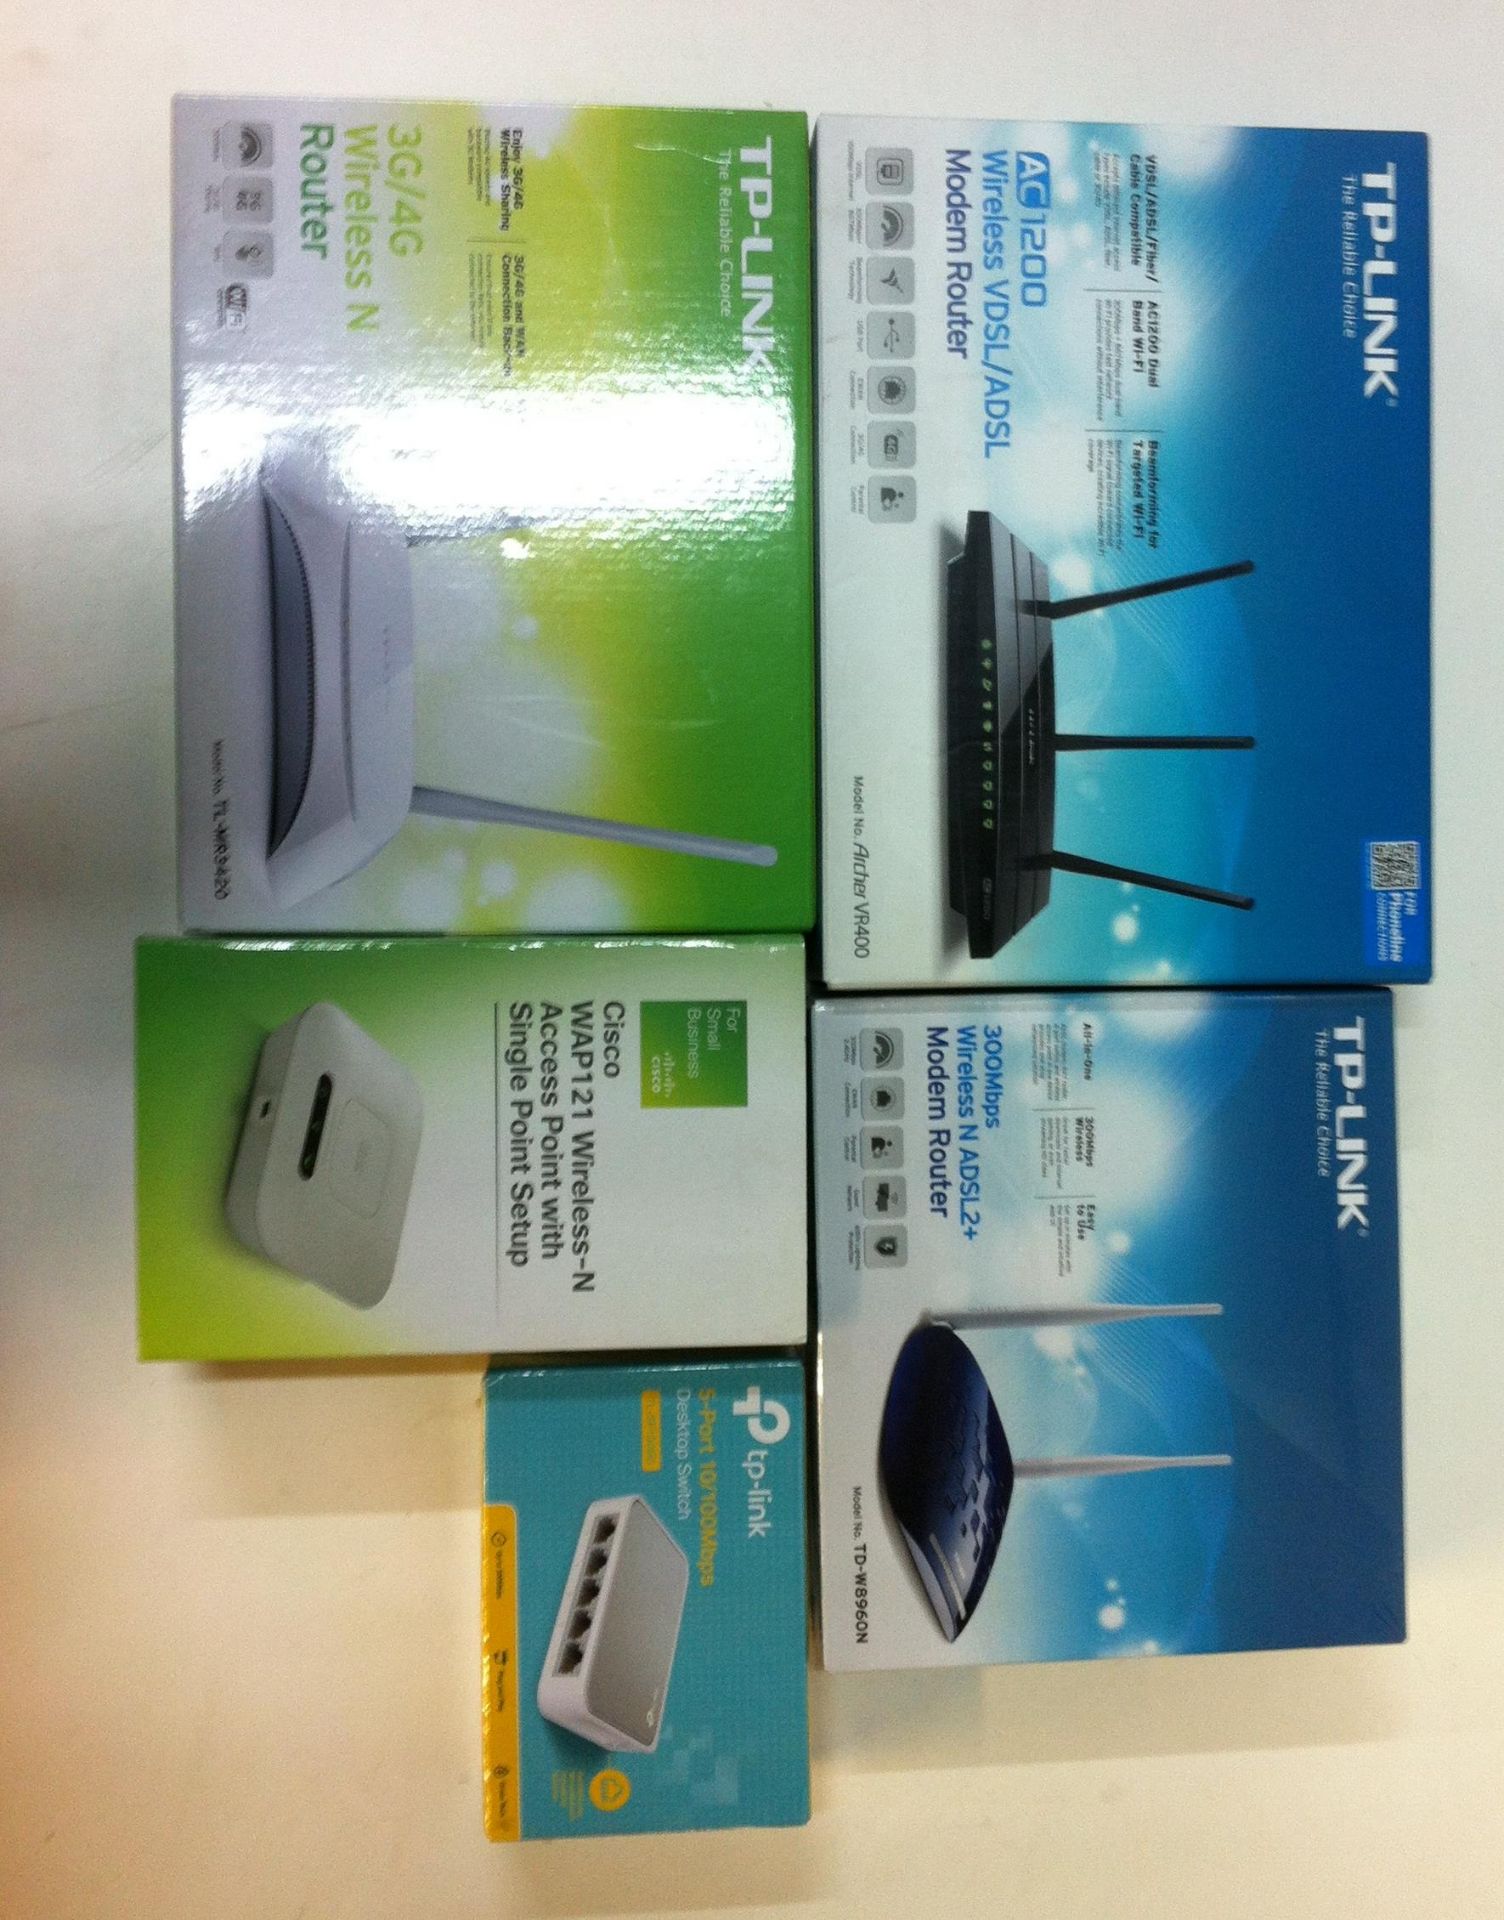 10 x Various Pieces of IT Hardware - Inc: Routers/Modems & Network Switches - RRP £446.65